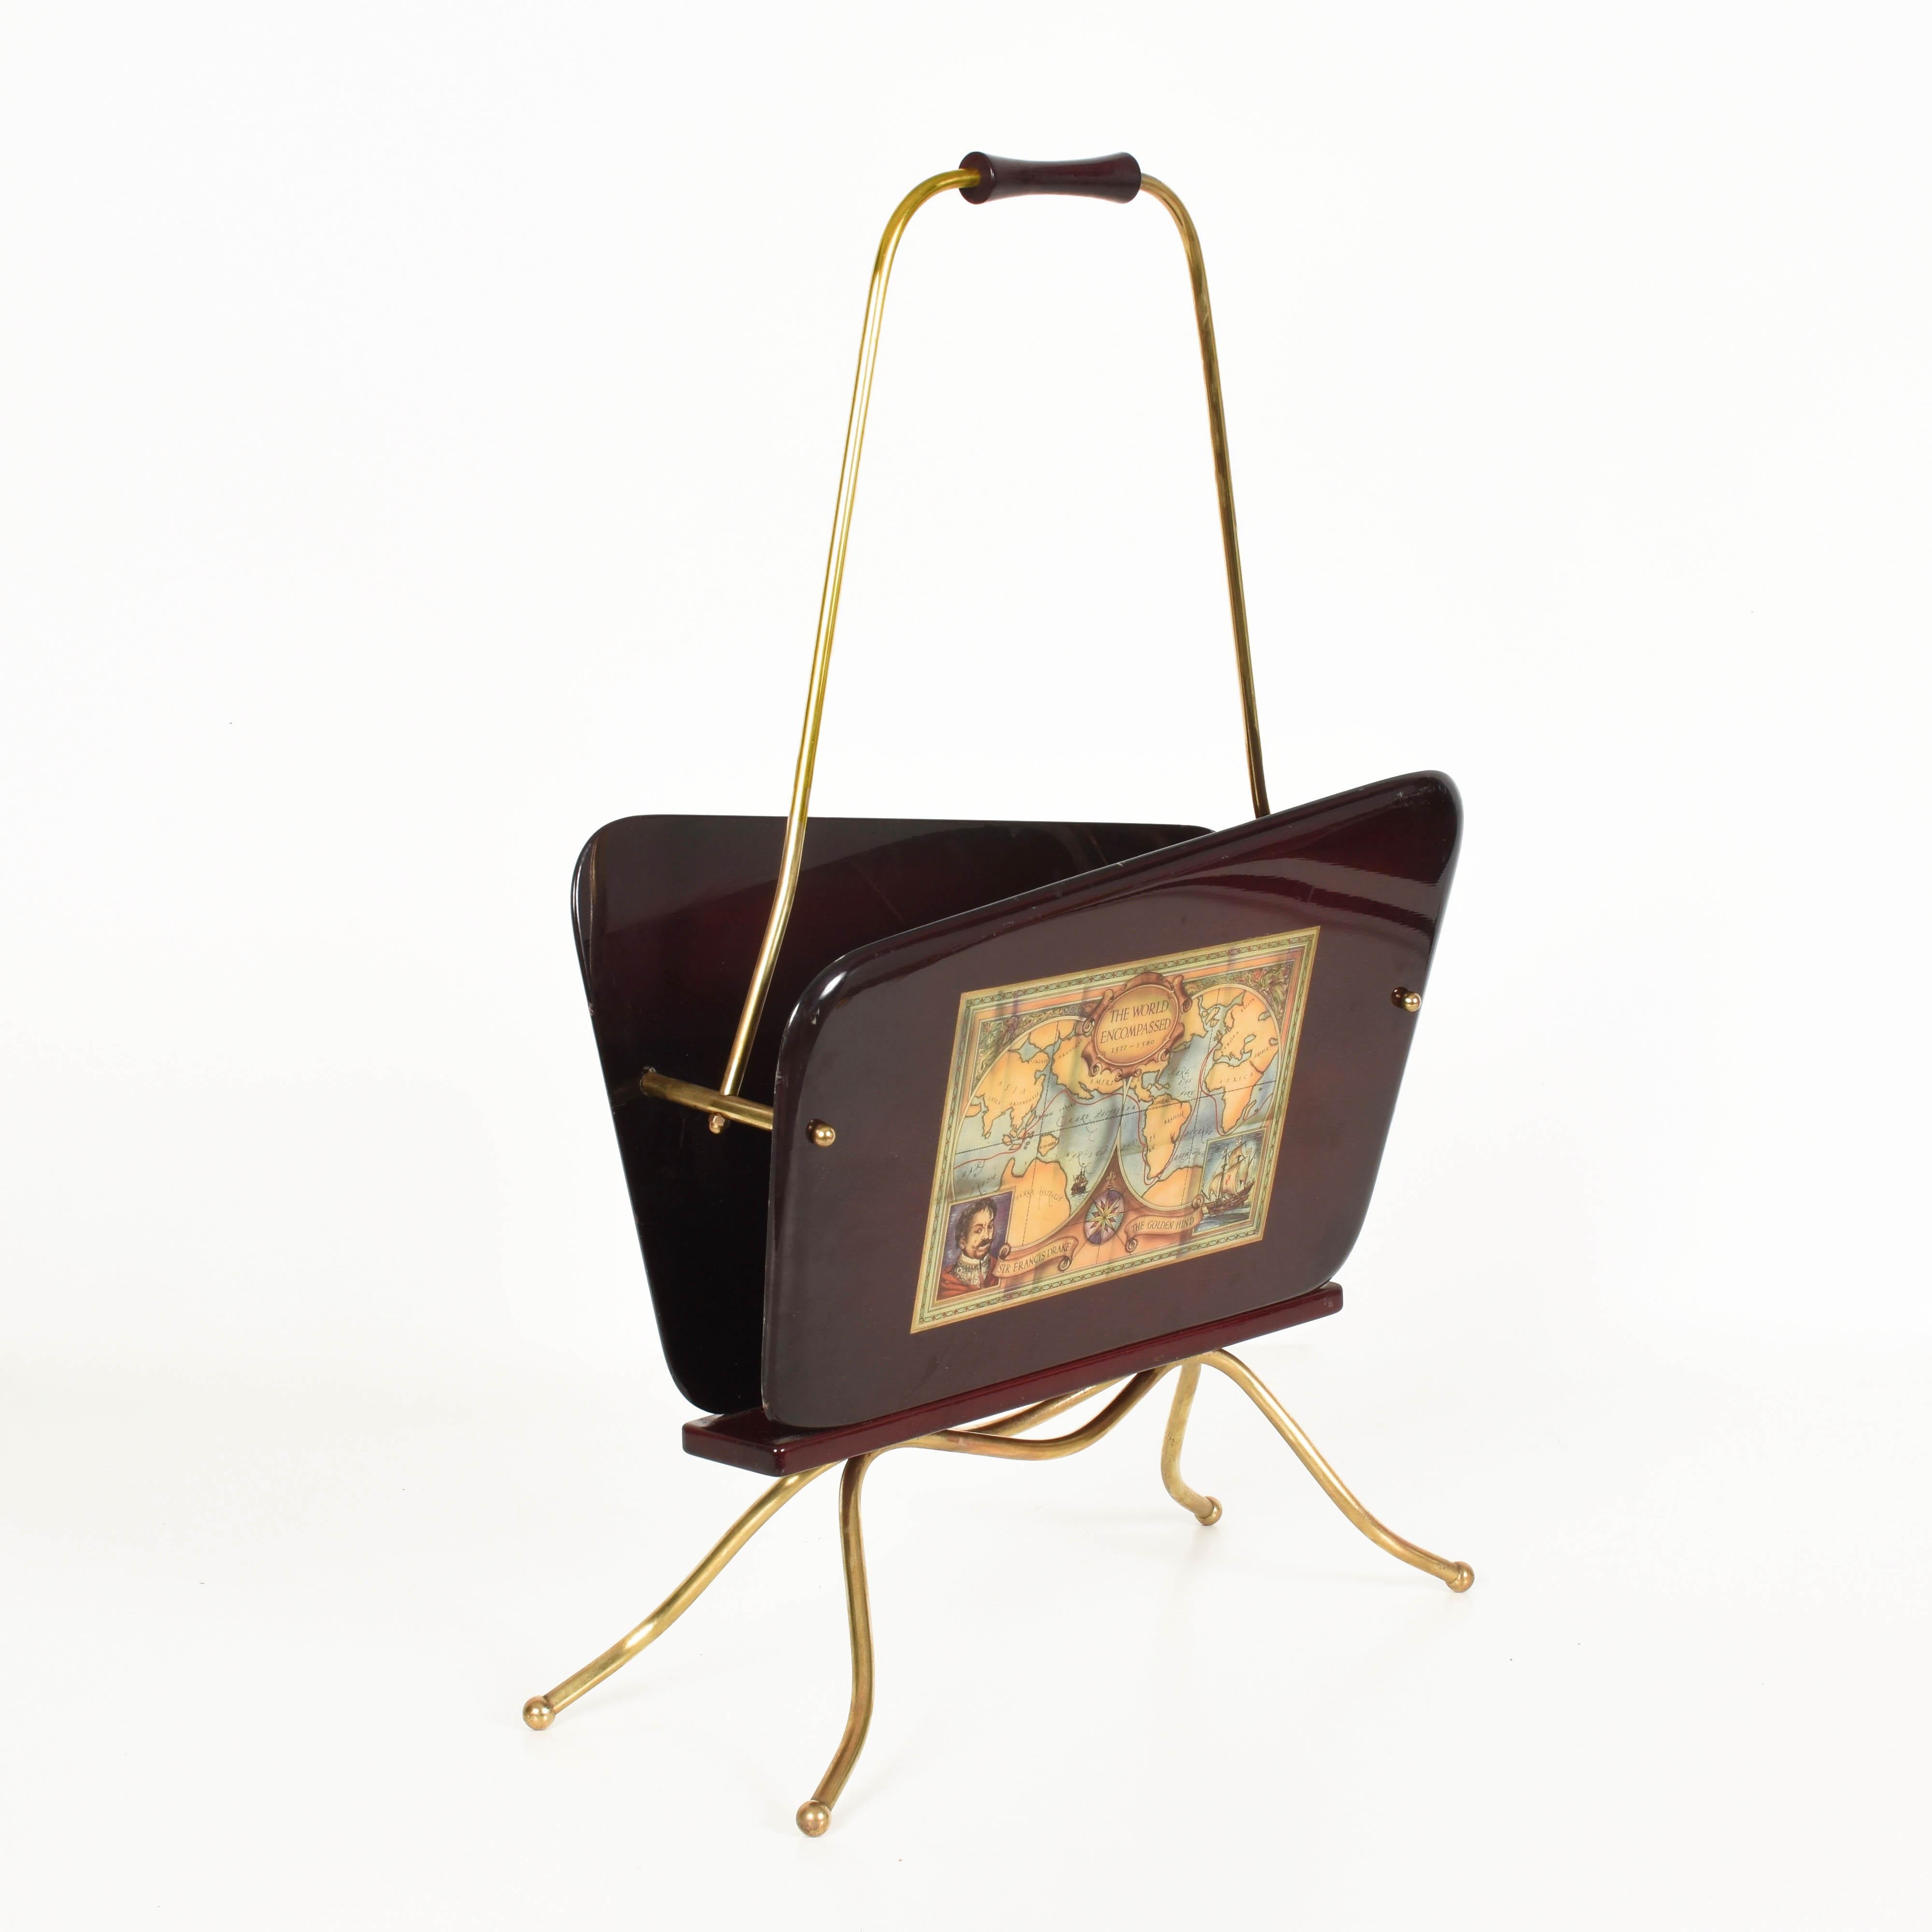 Gio Ponti Midcentury Wood and Brass Italian Magazine Rack with Handle, 1950s For Sale 3